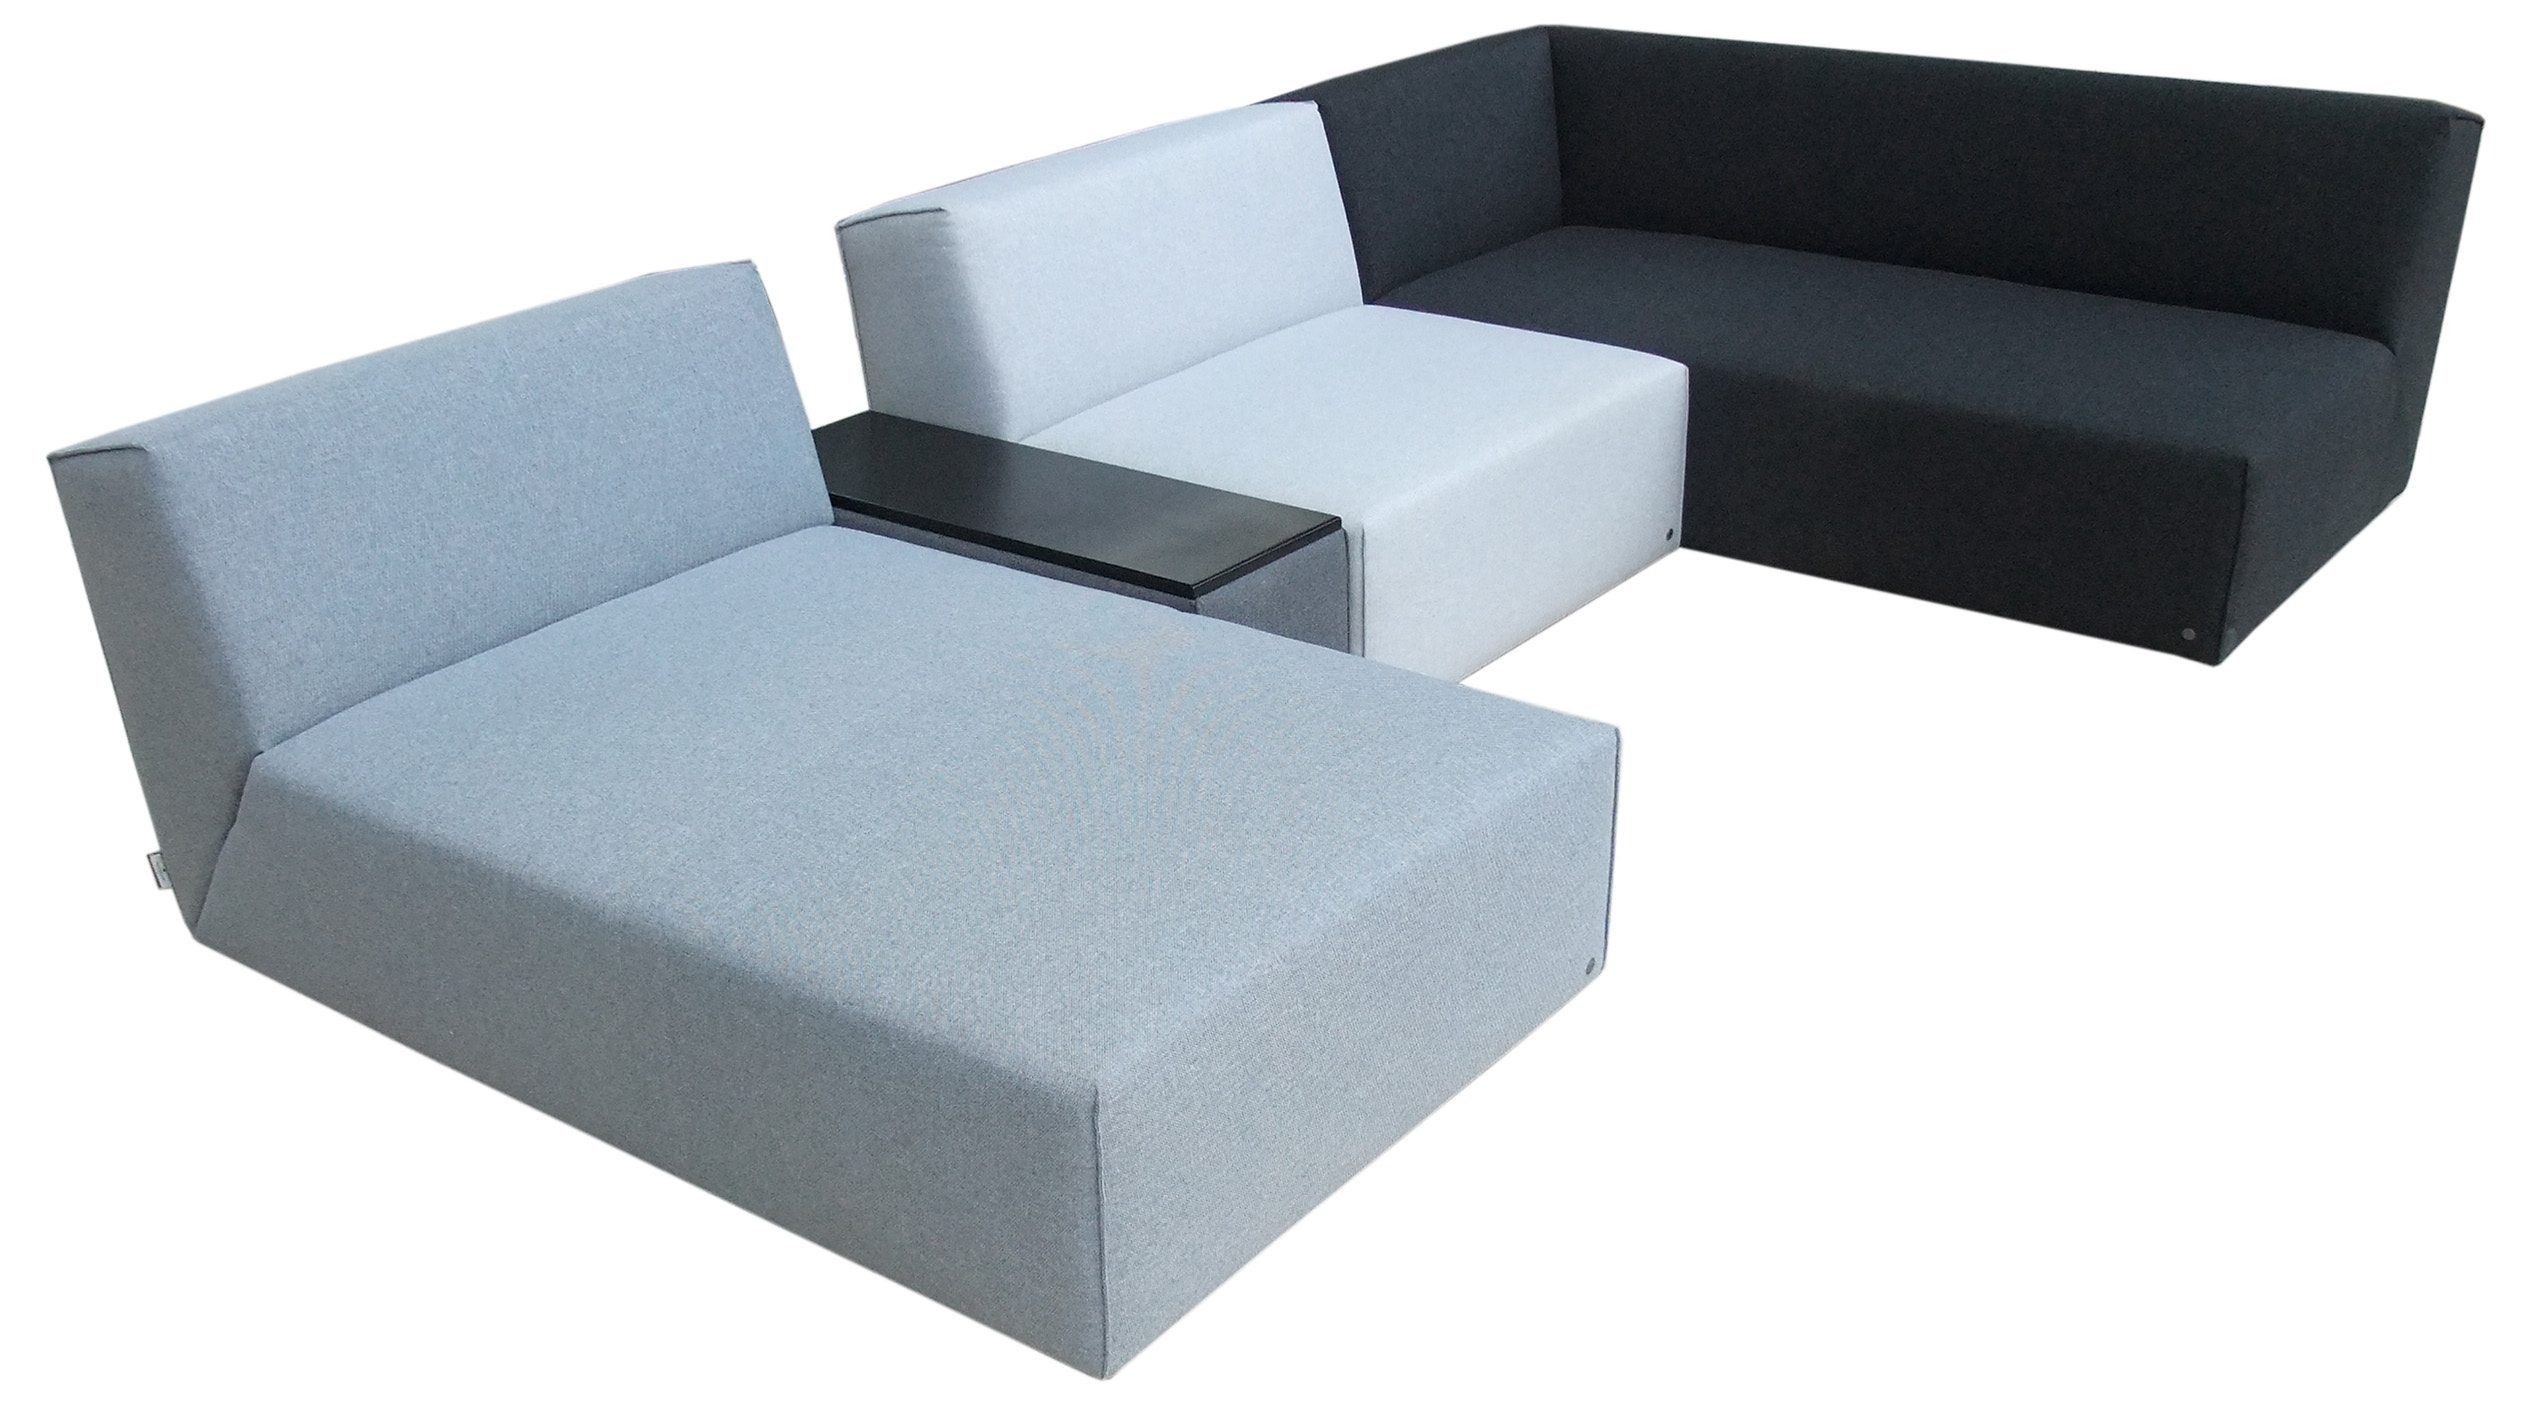 Chaiselongue wahlweise TAILOR Sofaelement ELEMENTS, TOM mit Bettfunktion HOME